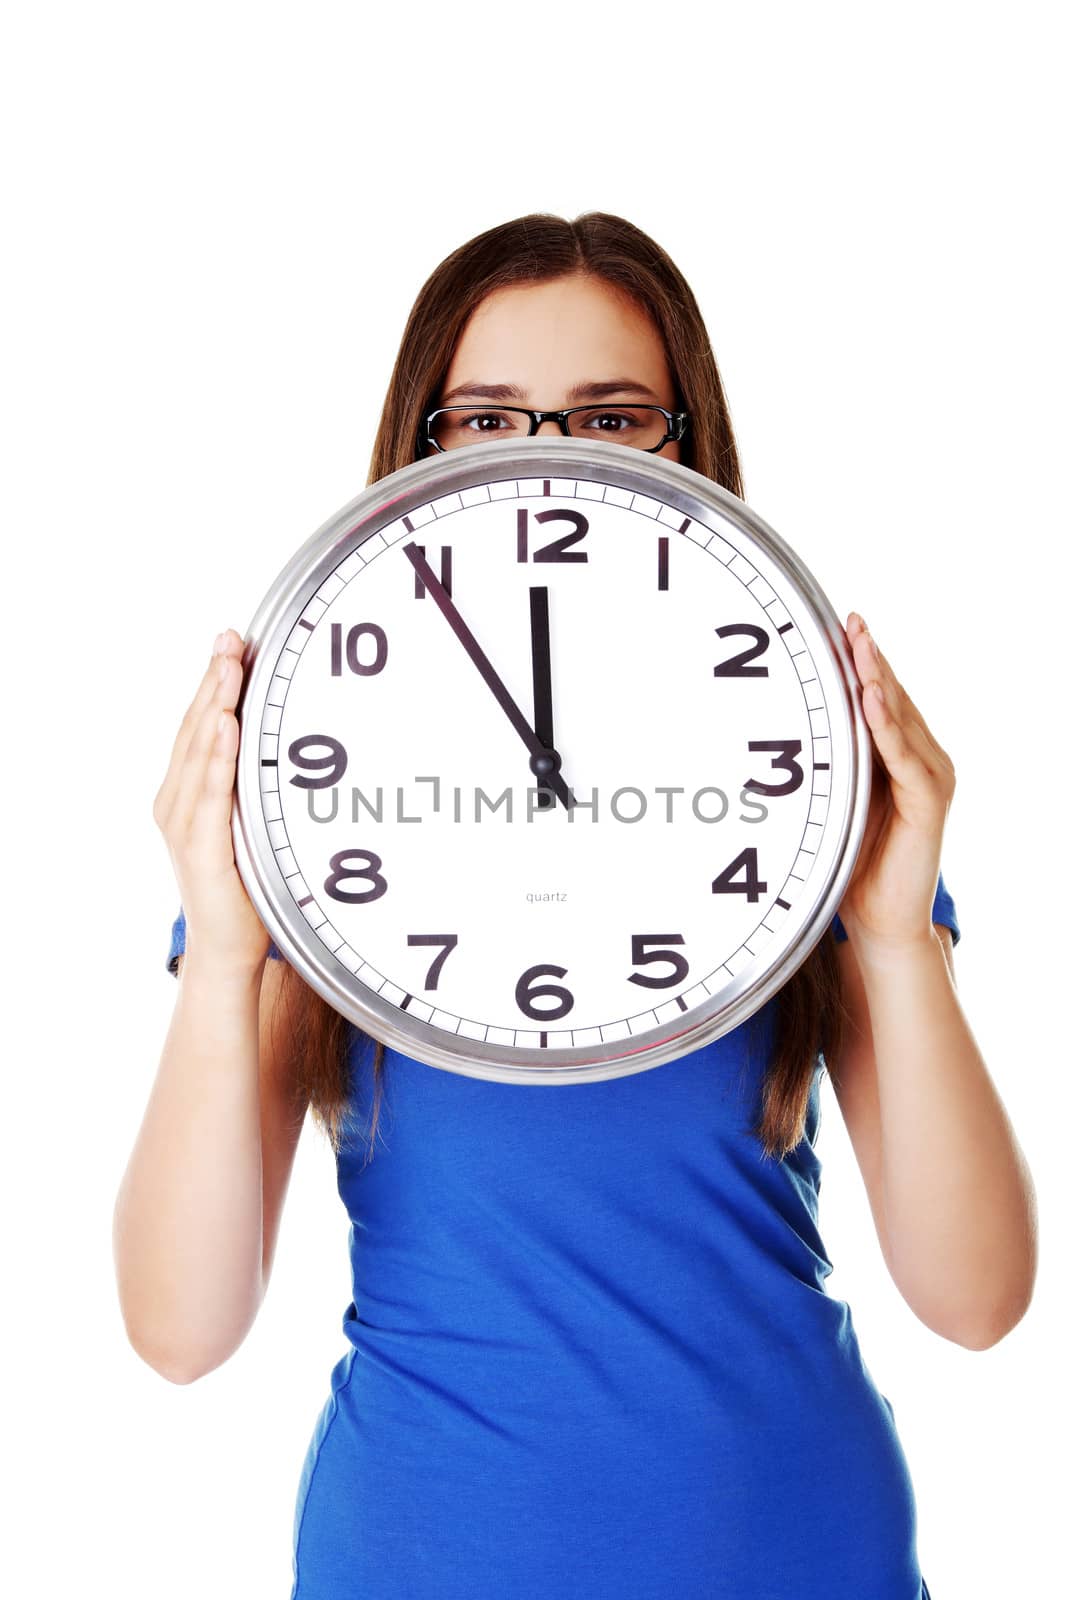 Young casual woman holding clock. Isolated on white.